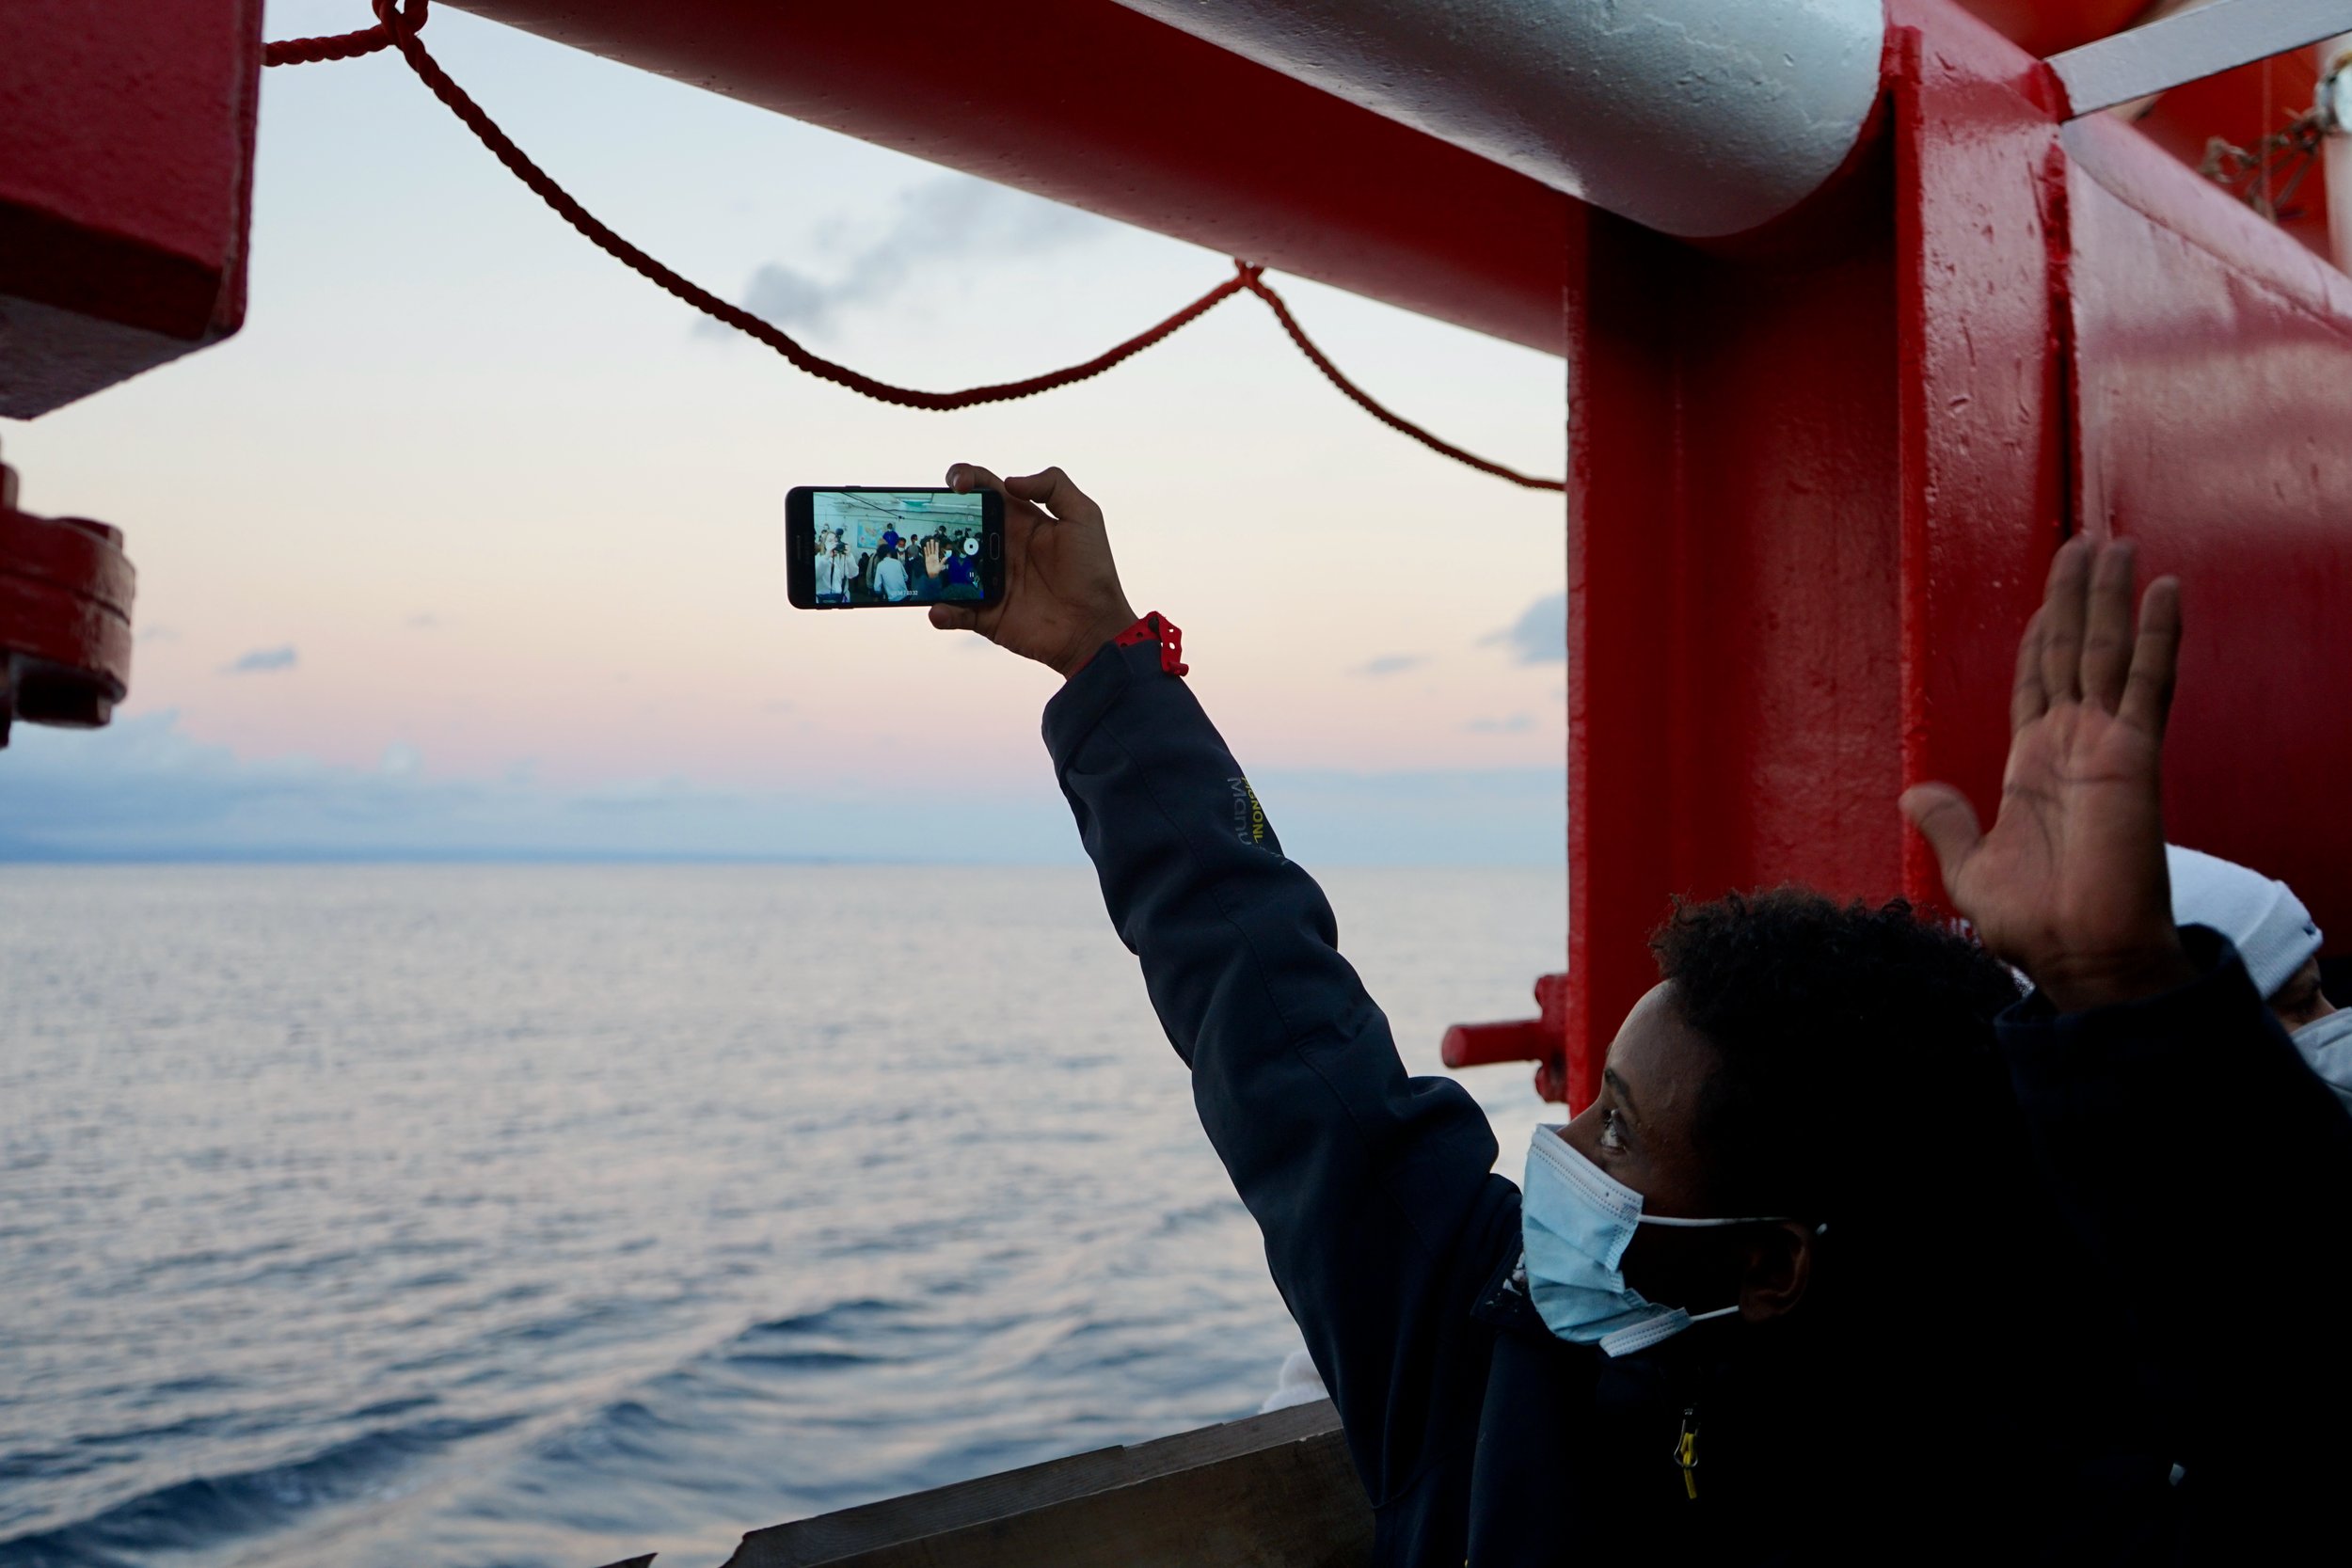 A young man takes a selfie with the cheering survivors on board following the announcement for a place of safety. 